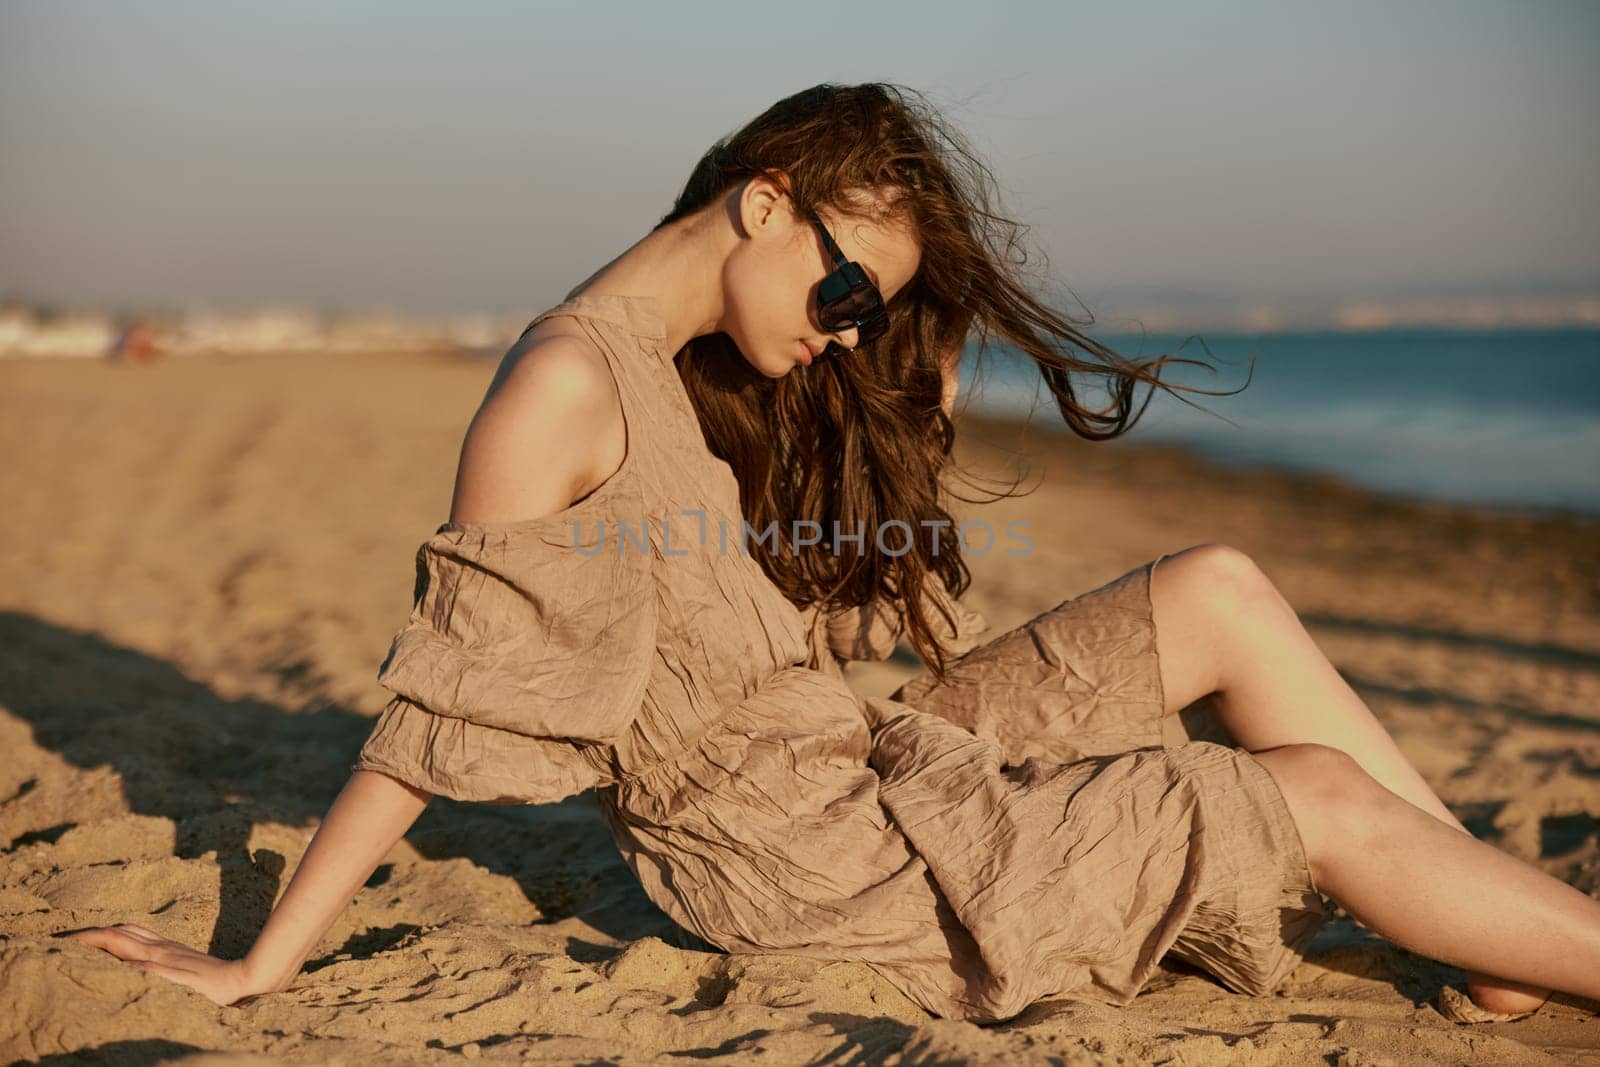 red-haired woman in dark sunglasses and sand-colored dress on the beach enjoying the sunset by Vichizh